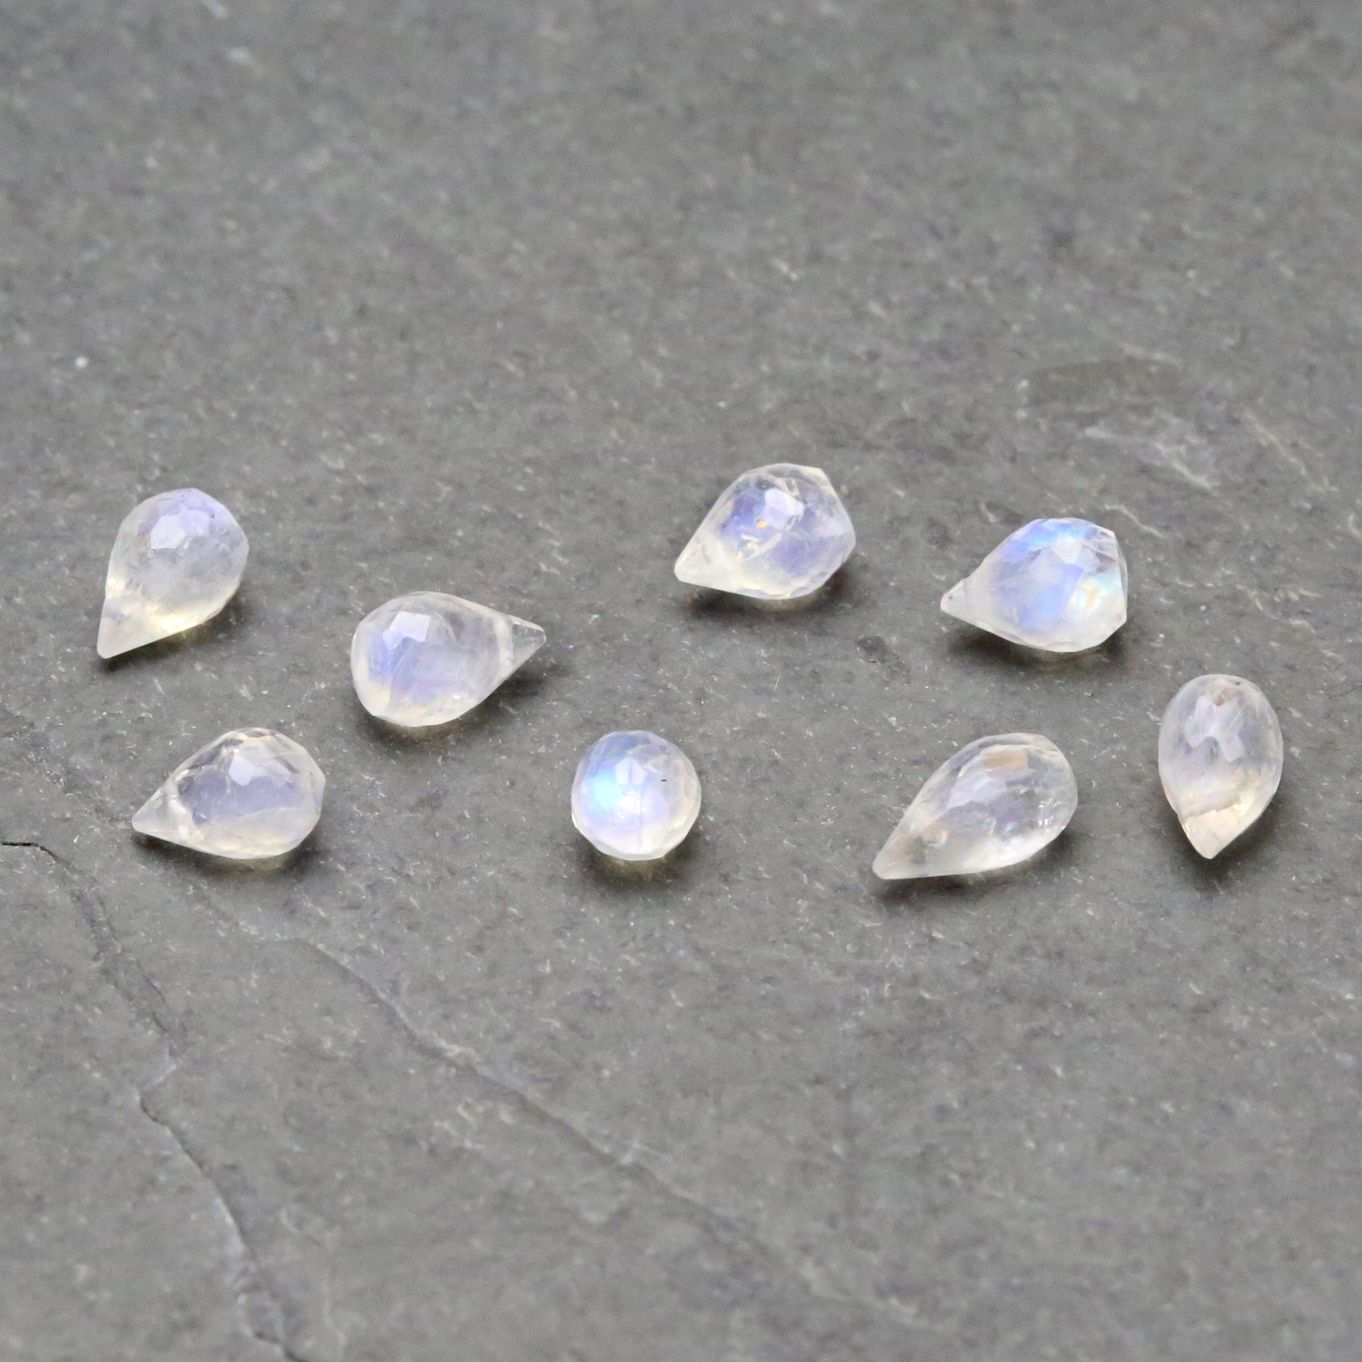 Rainbow Moonstone Faceted Drop Briolette Beads - Approx From 5mm, Pack Of 10 Beads